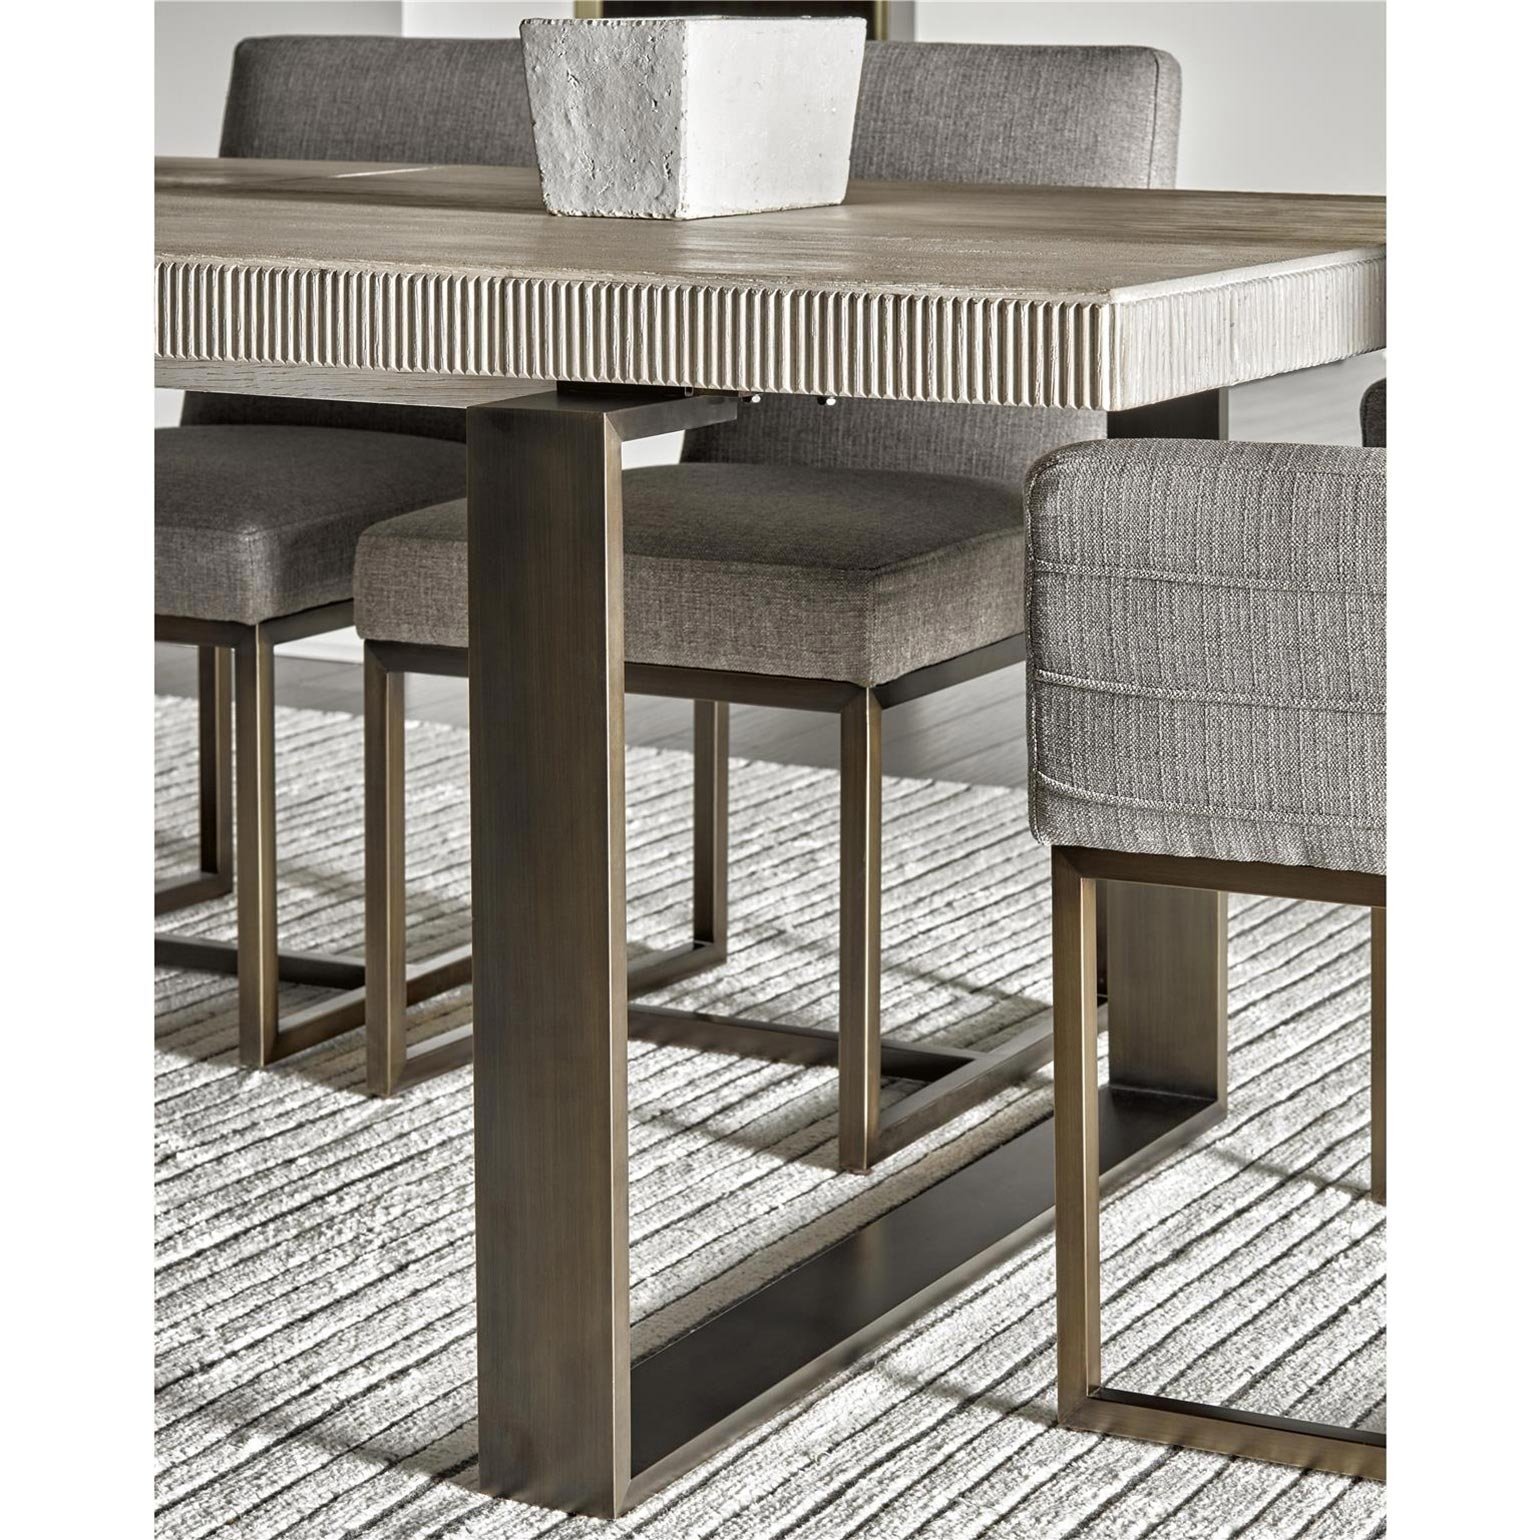 John Modern Classic Ivory Wood Top Bronze Metal Extendable Dining Table - Image 3